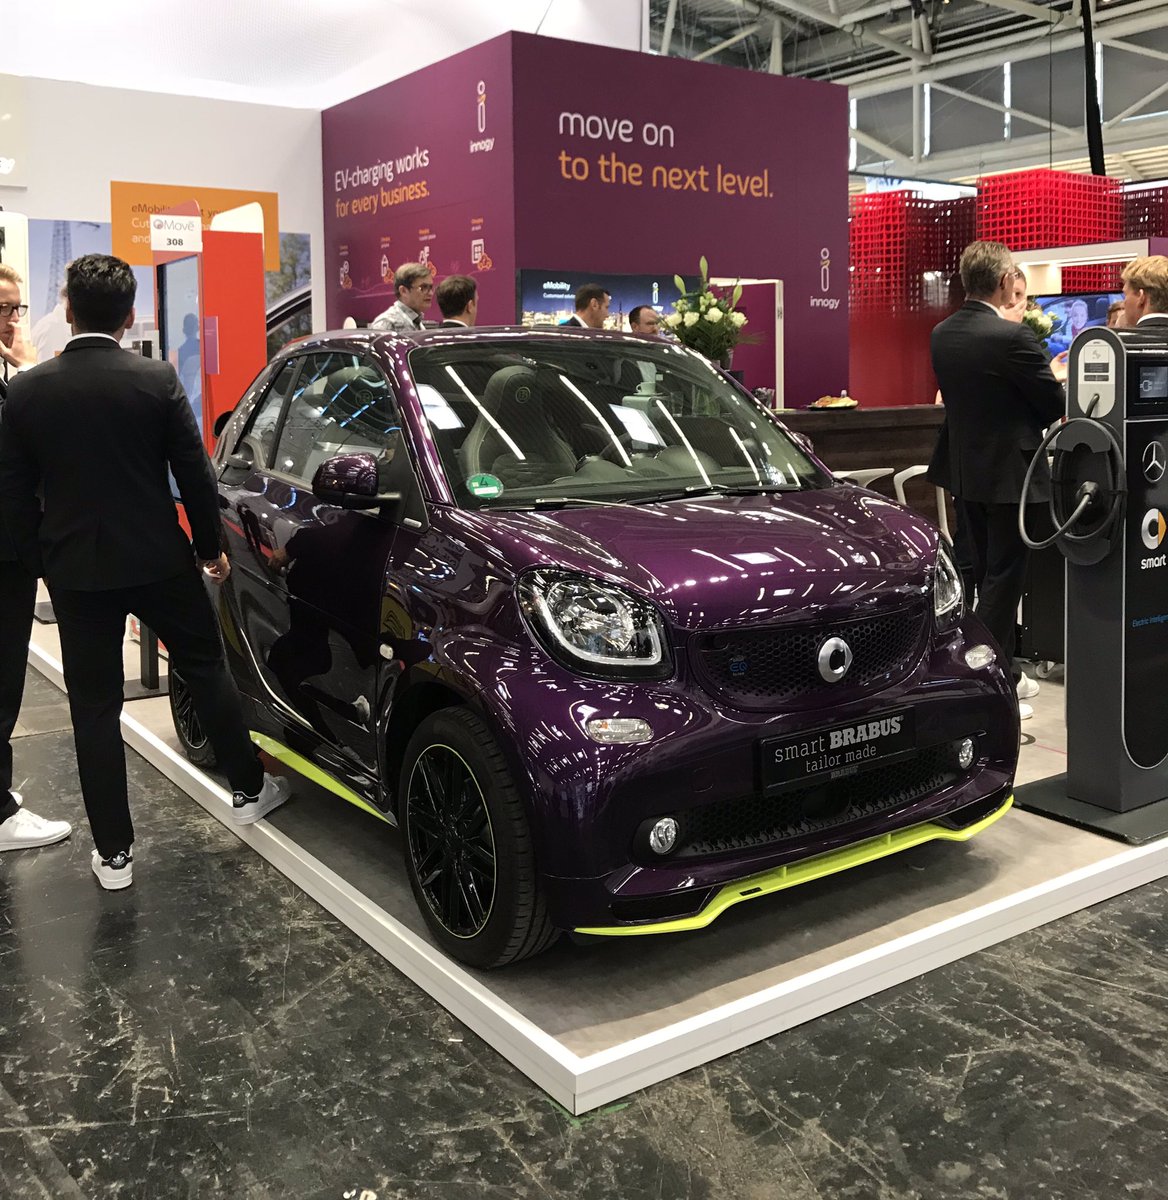 Well this is a little bit cool! 😎🕺@smartcarUK @e_Move_360 #PurpleIsBack?!